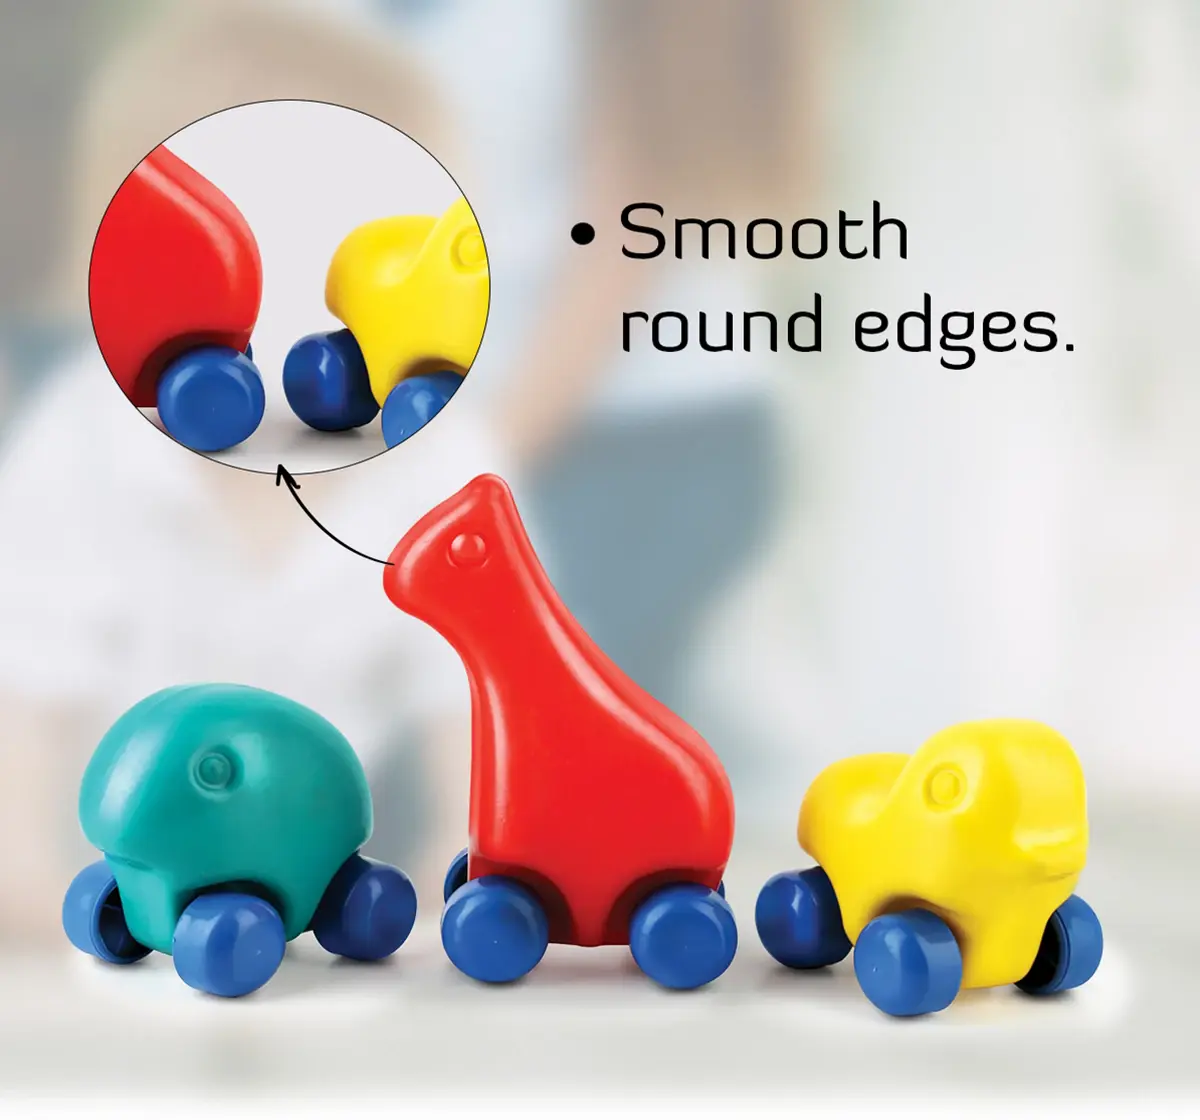 Ok Play Little Pets Shape Toys Set of 3 toddlers toy Multicolor 0M+